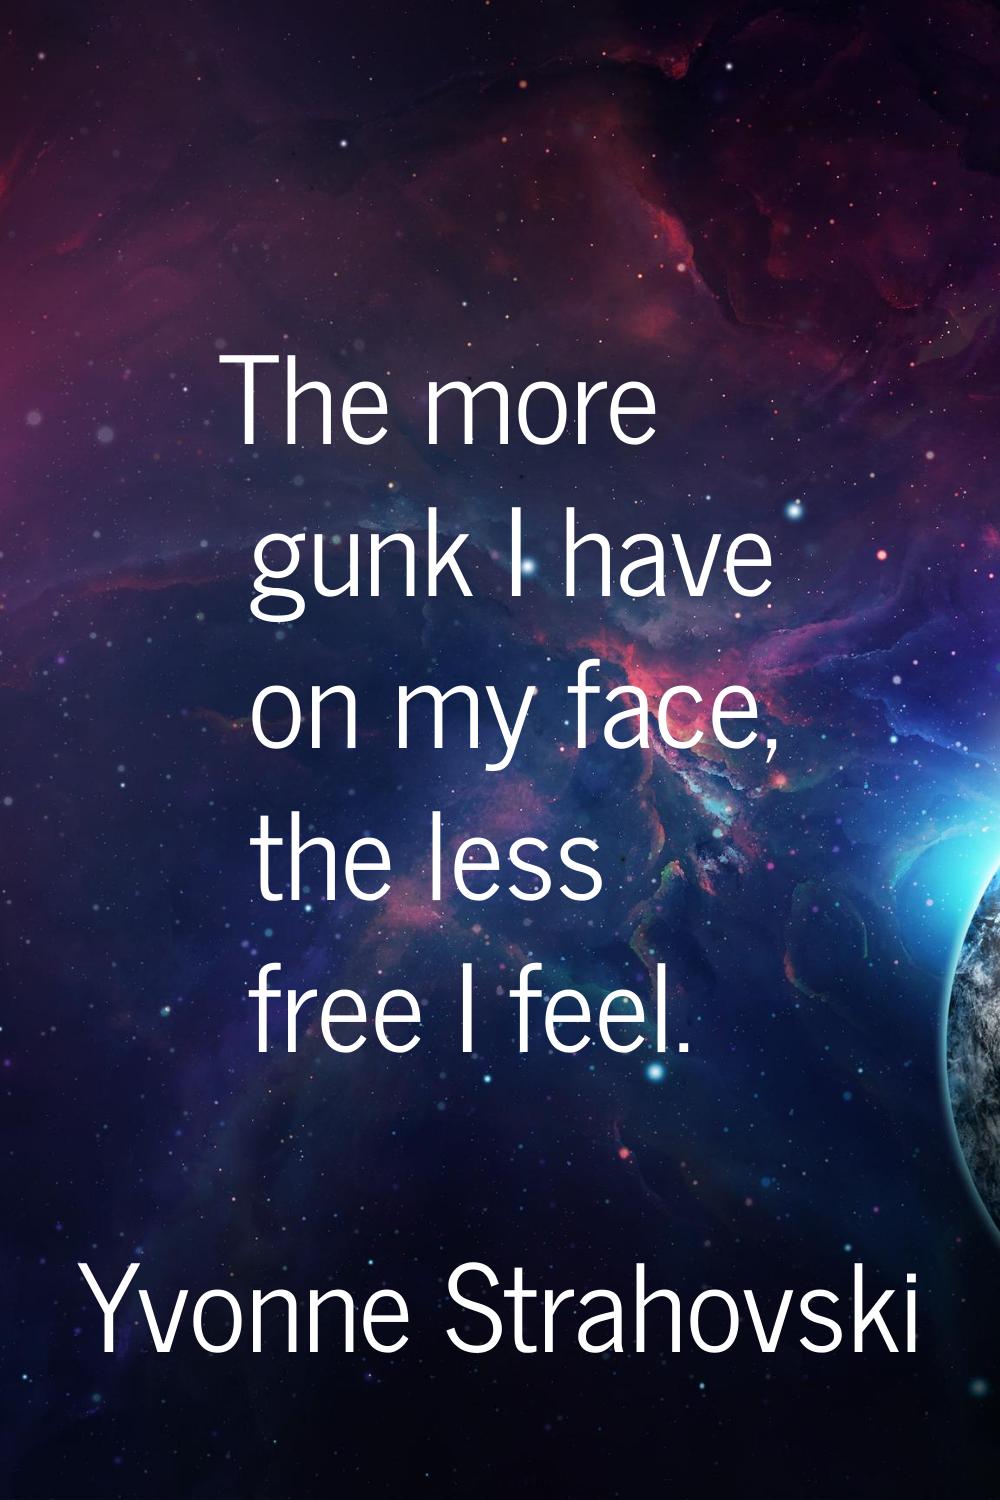 The more gunk I have on my face, the less free I feel.